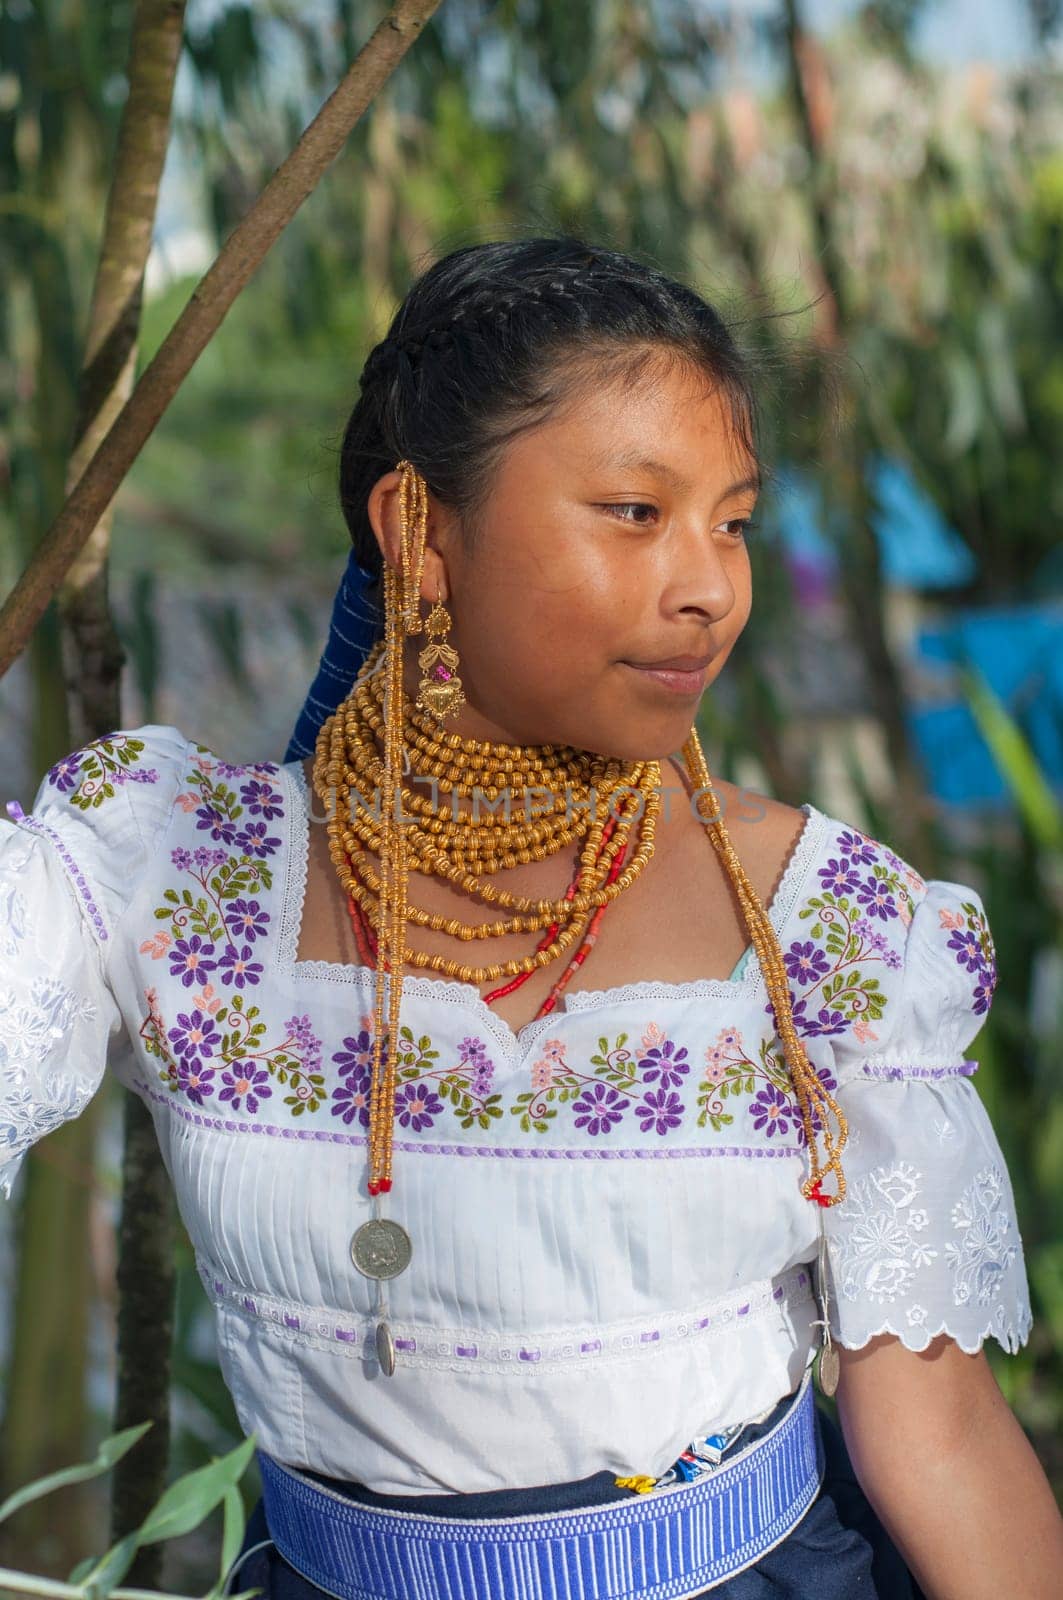 Indigenous Beauty in a Tranquil Natural Setting: Young Person's Serene Pose by Raulmartin